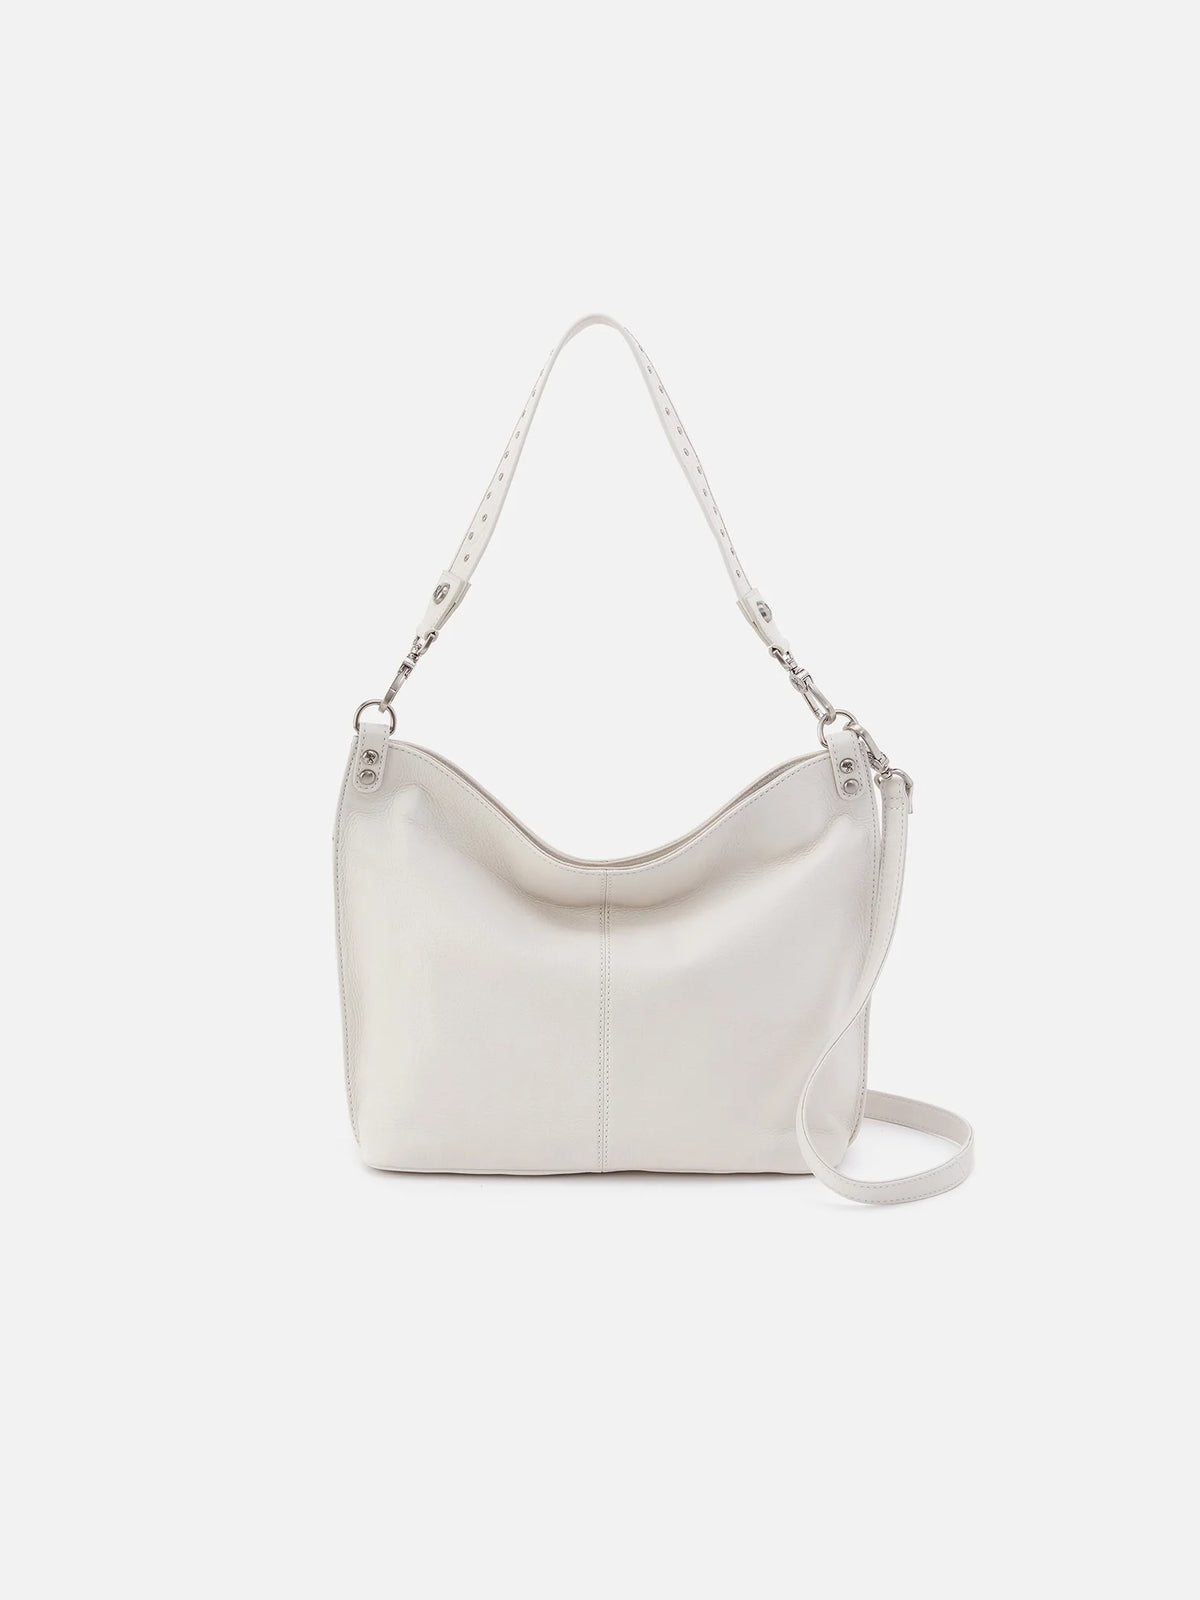 hobo pier studded shoulder crossbody pebbled leather in white-front view